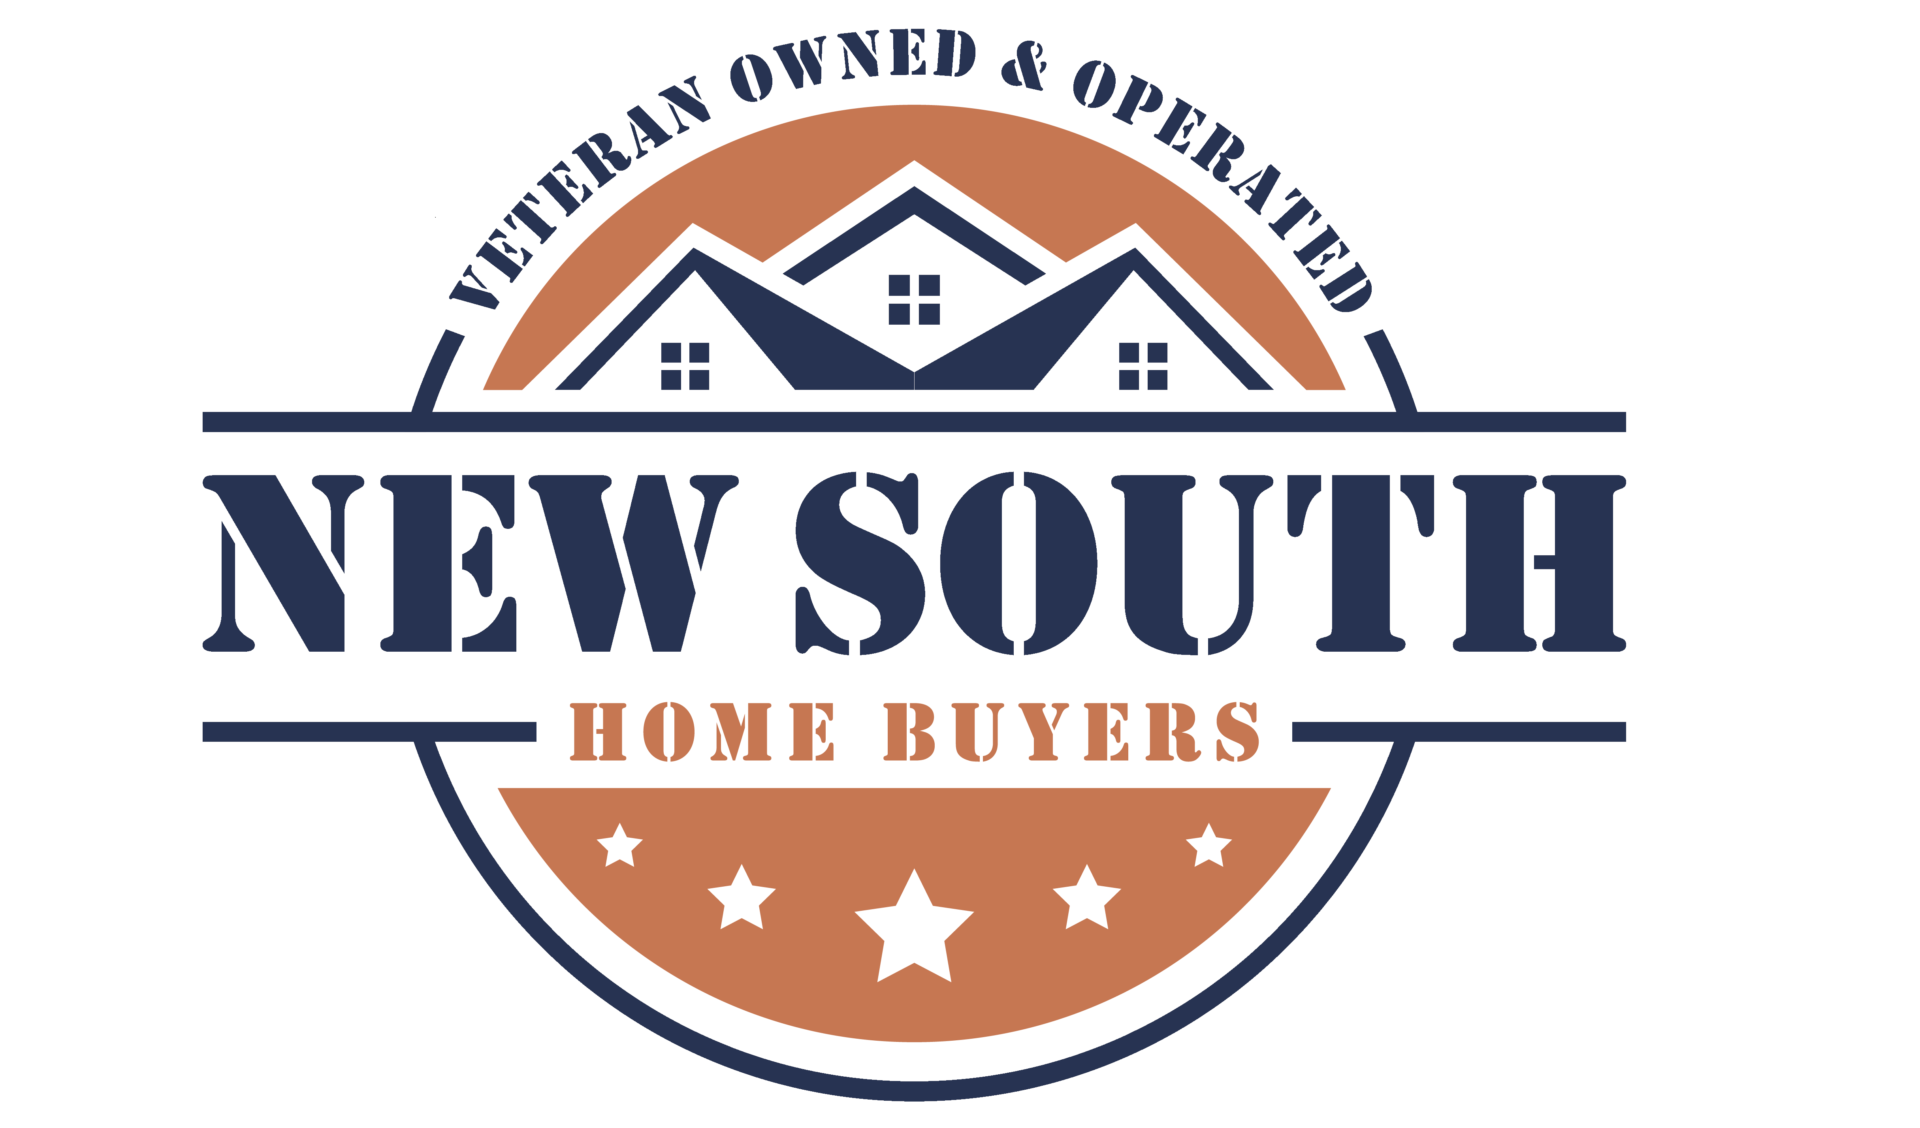 New South Home Buyers logo